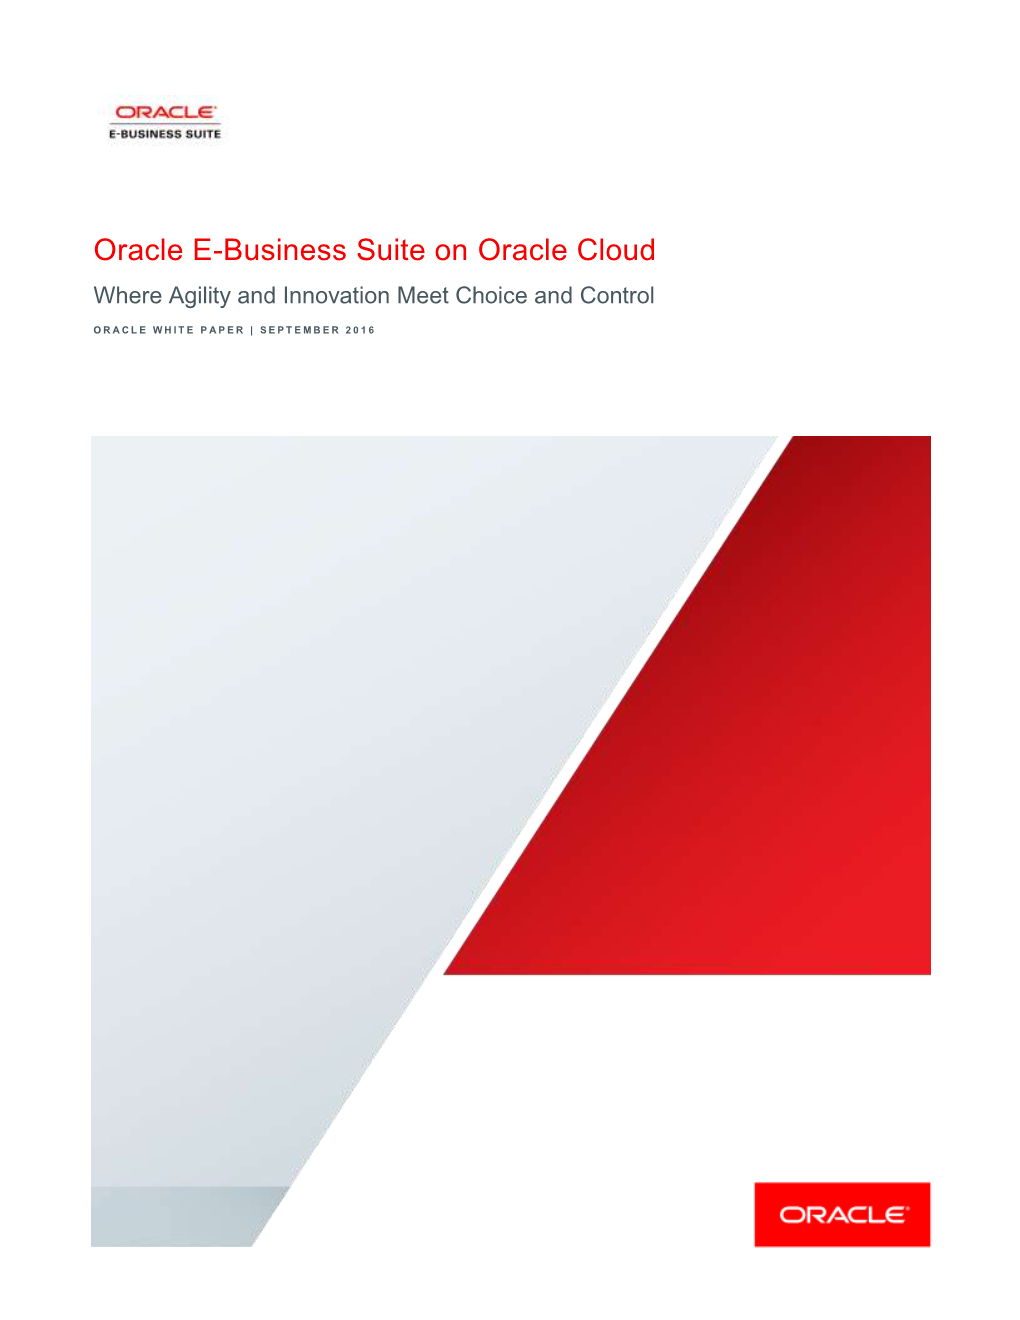 Oracle E-Business Suite on Oracle Cloud Where Agility and Innovation Meet Choice and Control